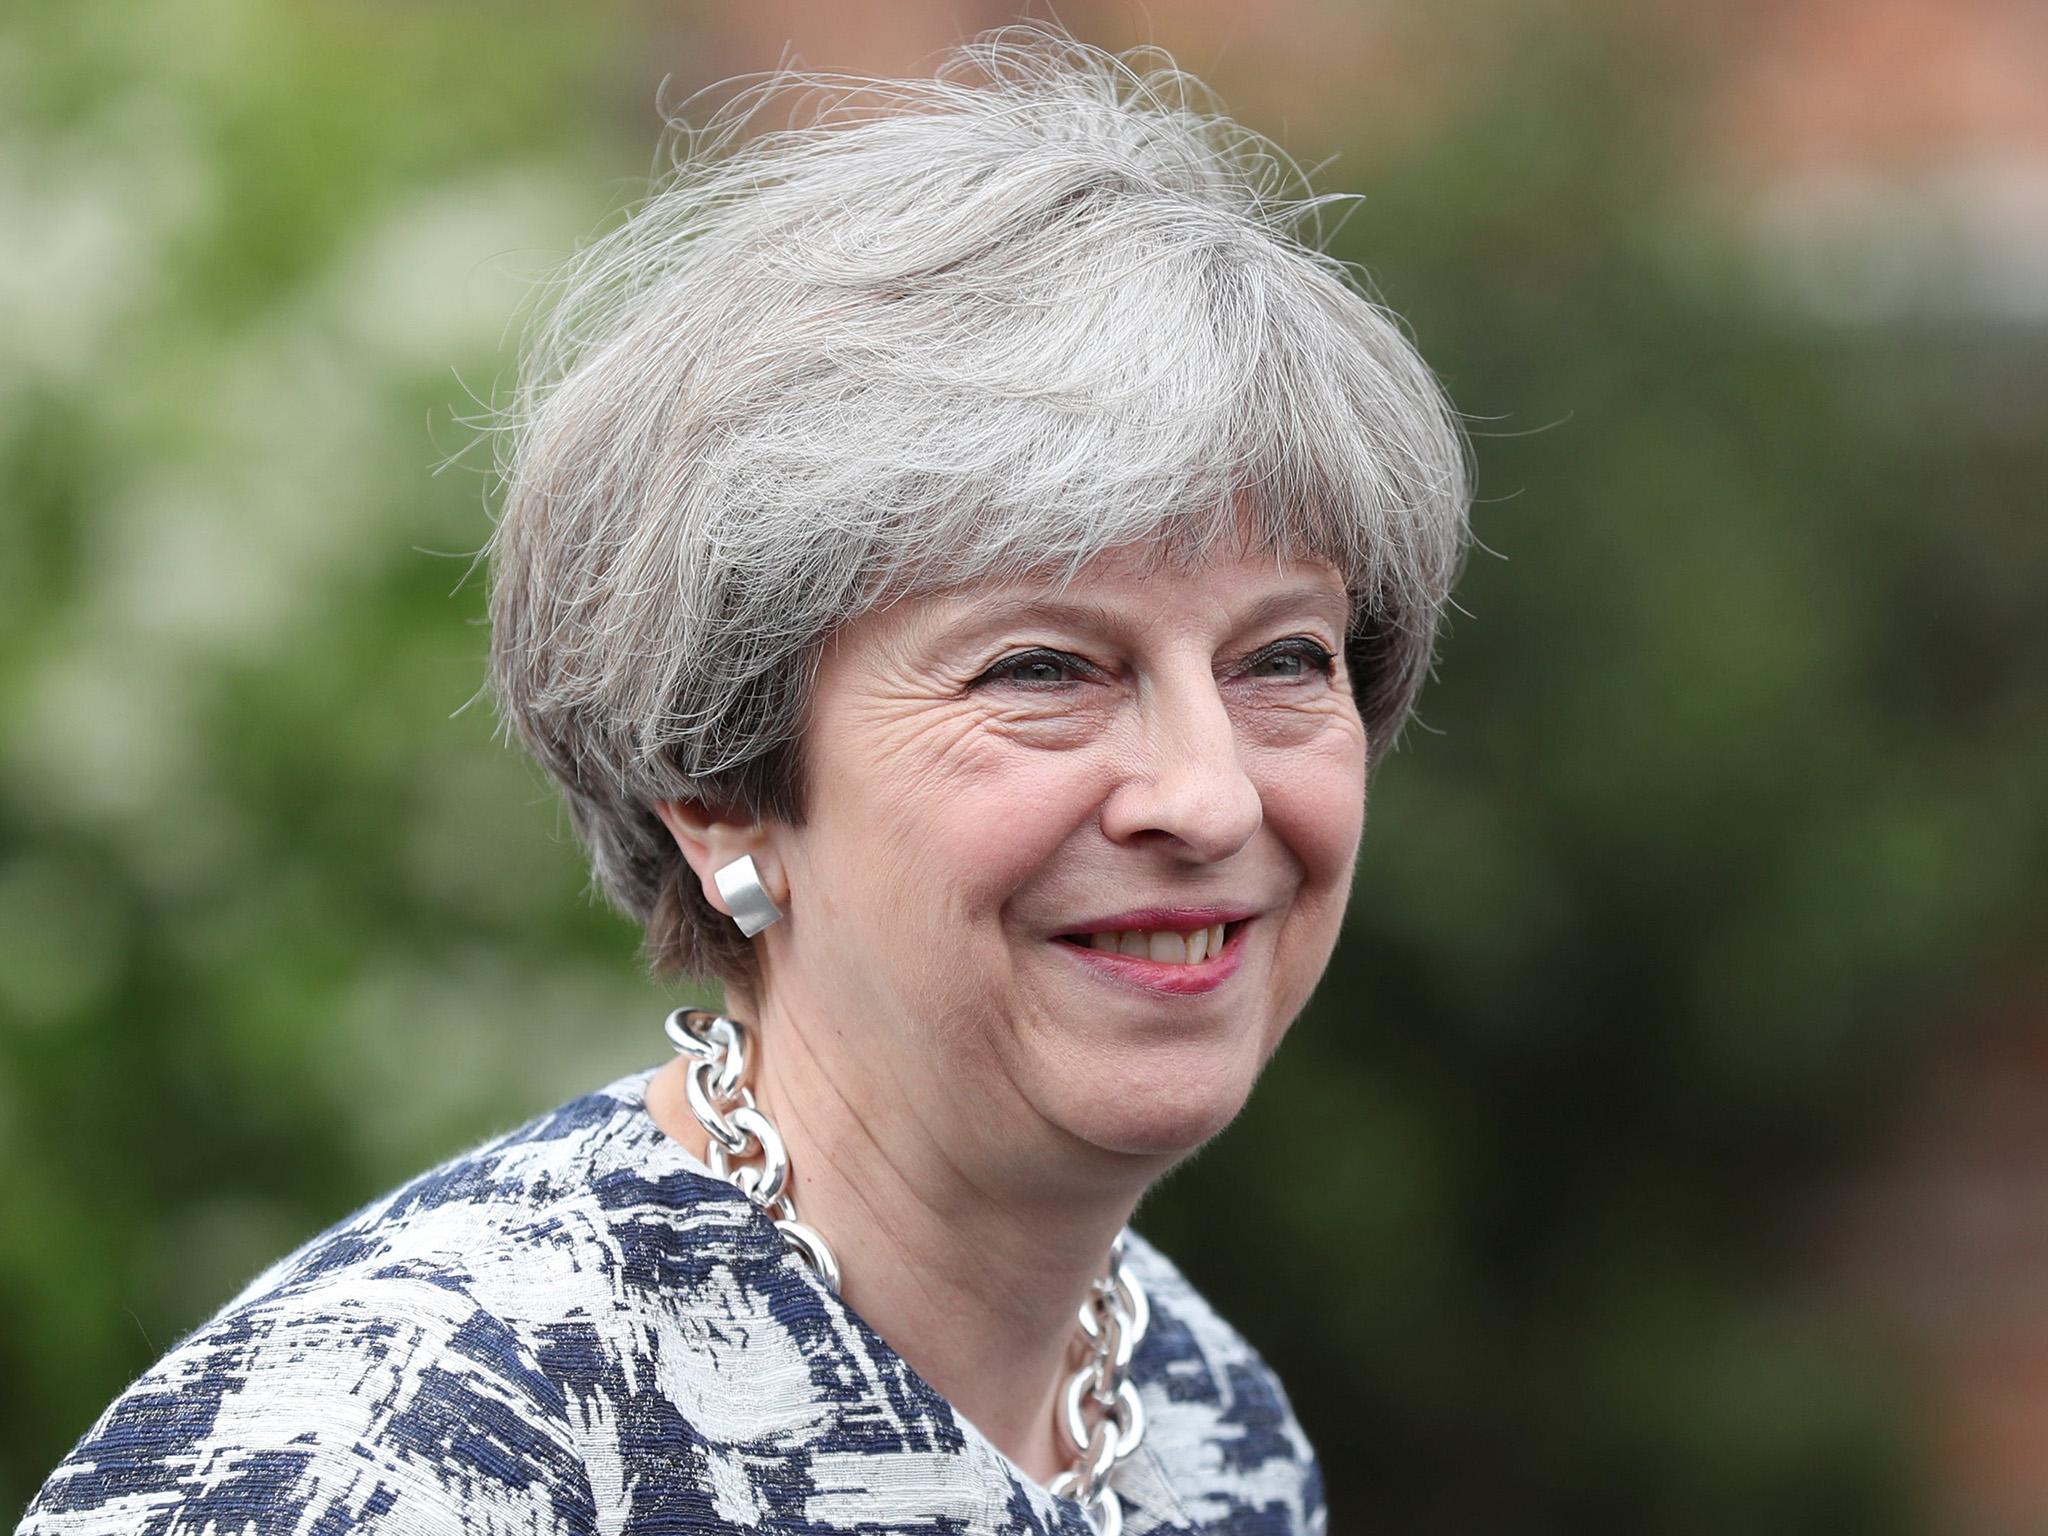 Several of May’s speeches – including one concerning her pledging not to call a snap election after becoming Prime Minister – are sampled